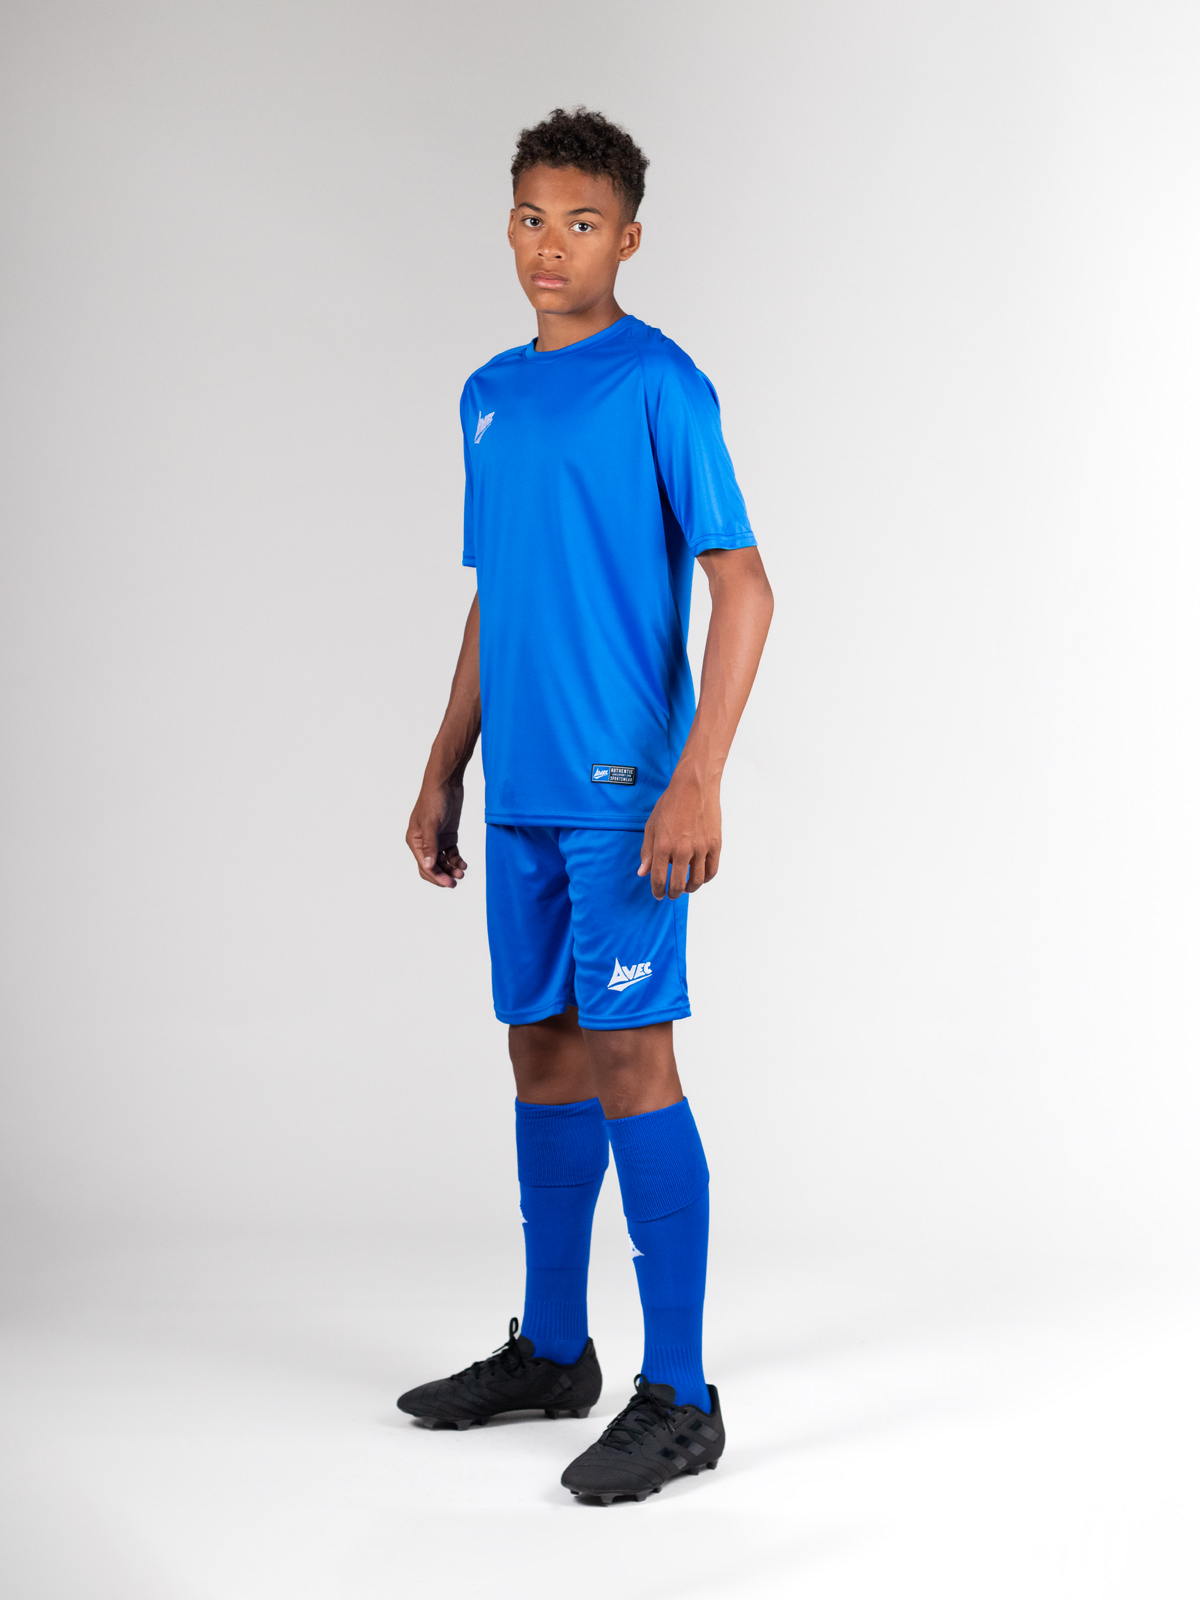 a child is wearing a full blue football kit